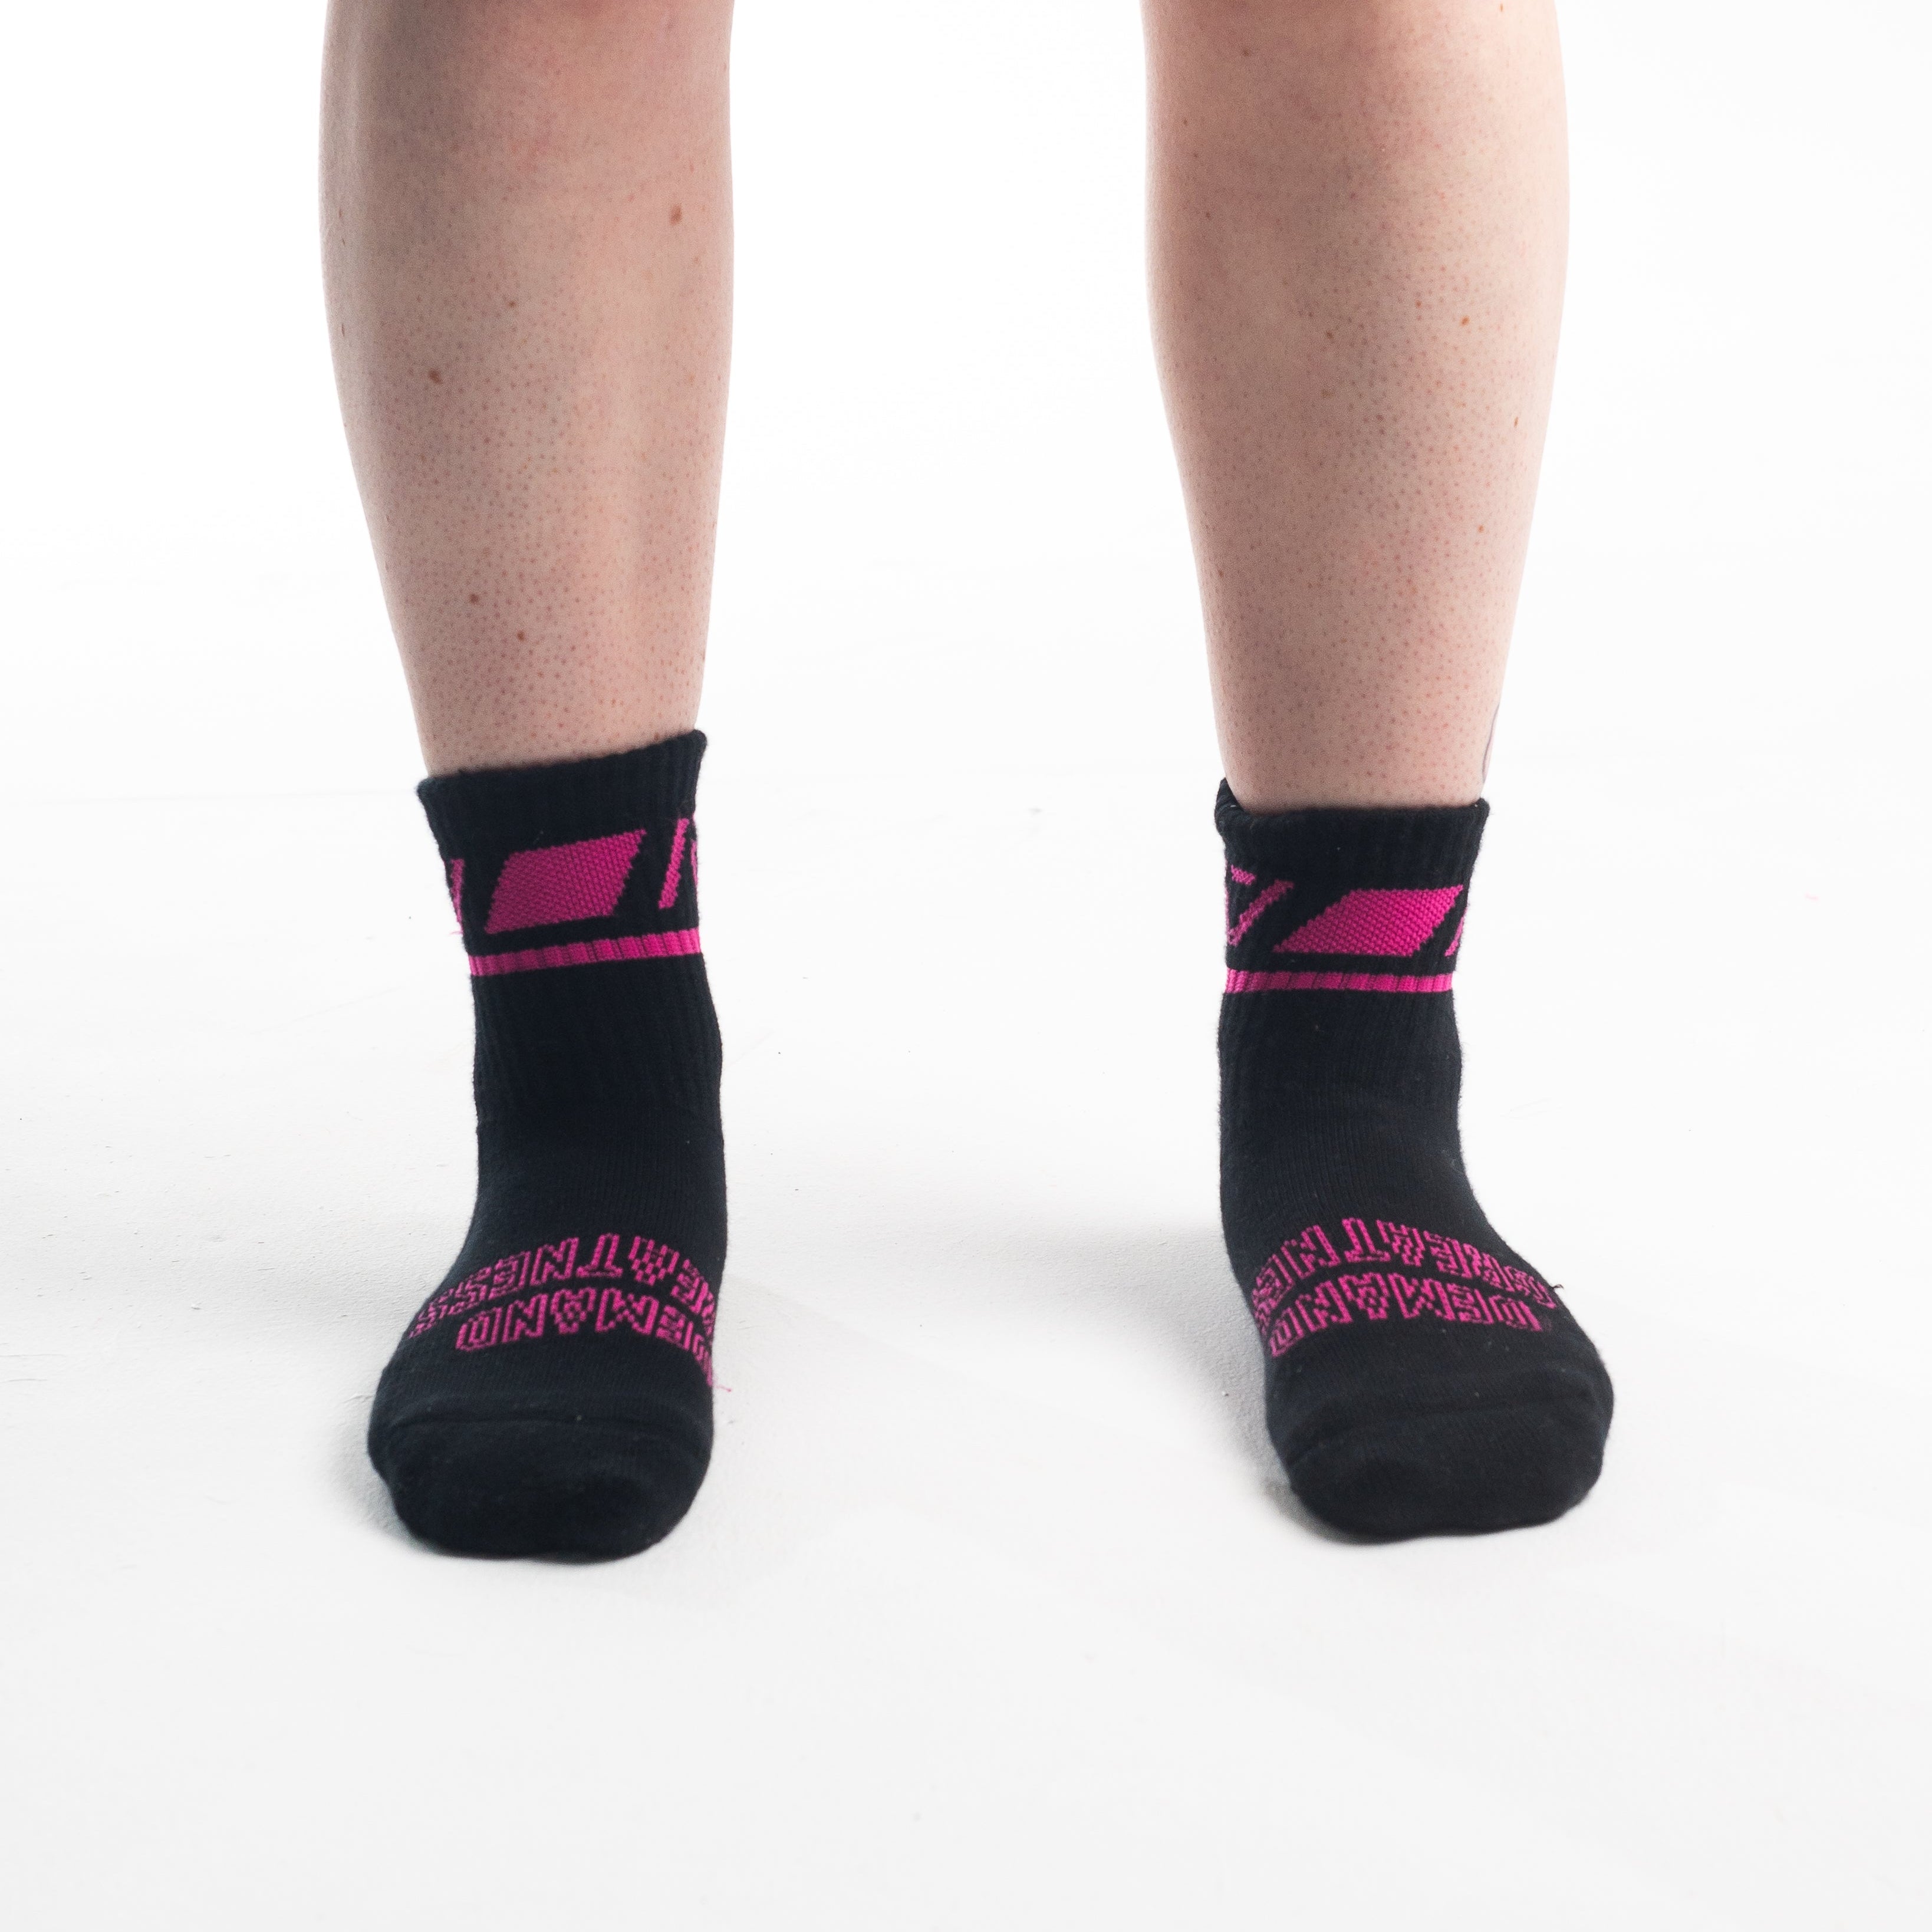 A7 Flamingo Crew socks showcase pink logos and let your energy show on the platform, in your training or while out and about. The IPF Approved Flamingo Meet Kit includes Powerlifting Singlet, A7 Meet Shirt, A7 Zebra Wrist Wraps, A7 Deadlift Socks, Hourglass Knee Sleeves (Stiff Knee Sleeves and Rigor Mortis Knee Sleeves). All A7 Powerlifting Equipment shipping to UK, Norway, Switzerland 